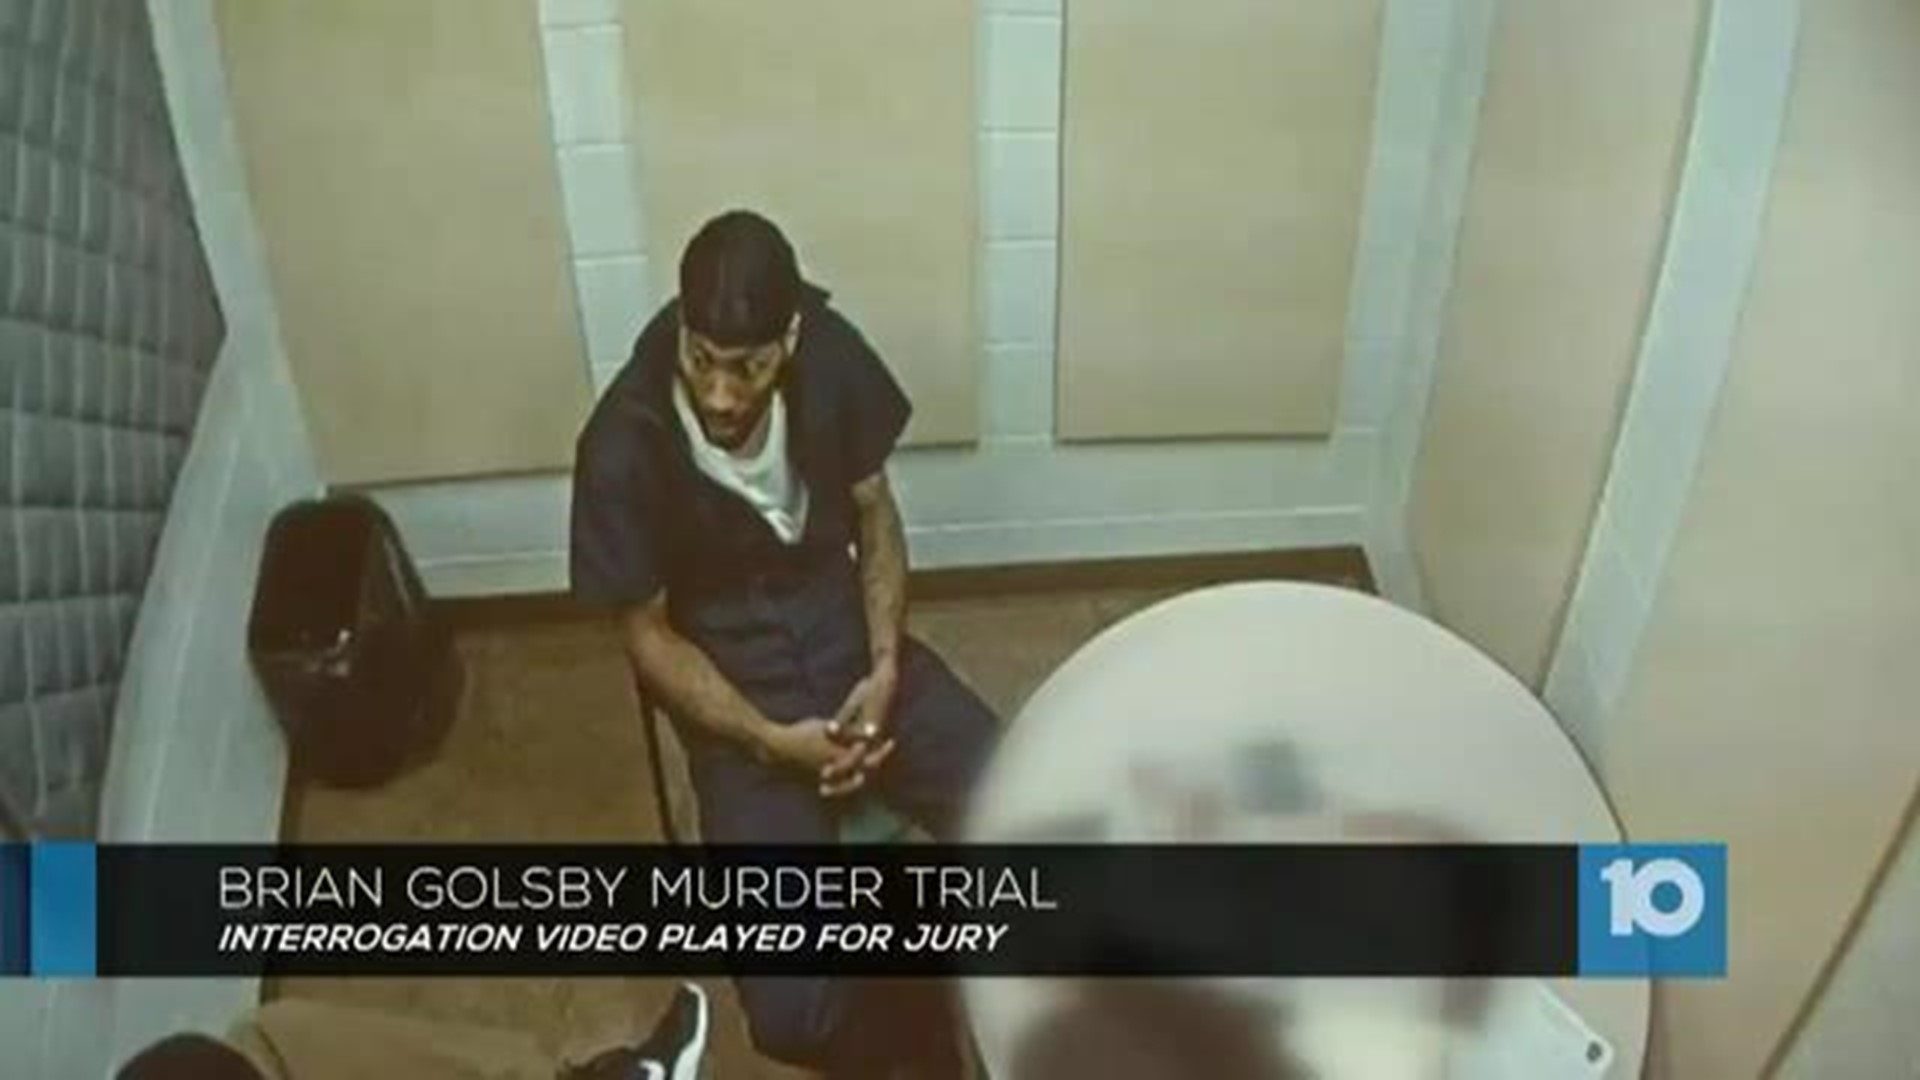 Jurors shown police interview with Golsby after his arrest